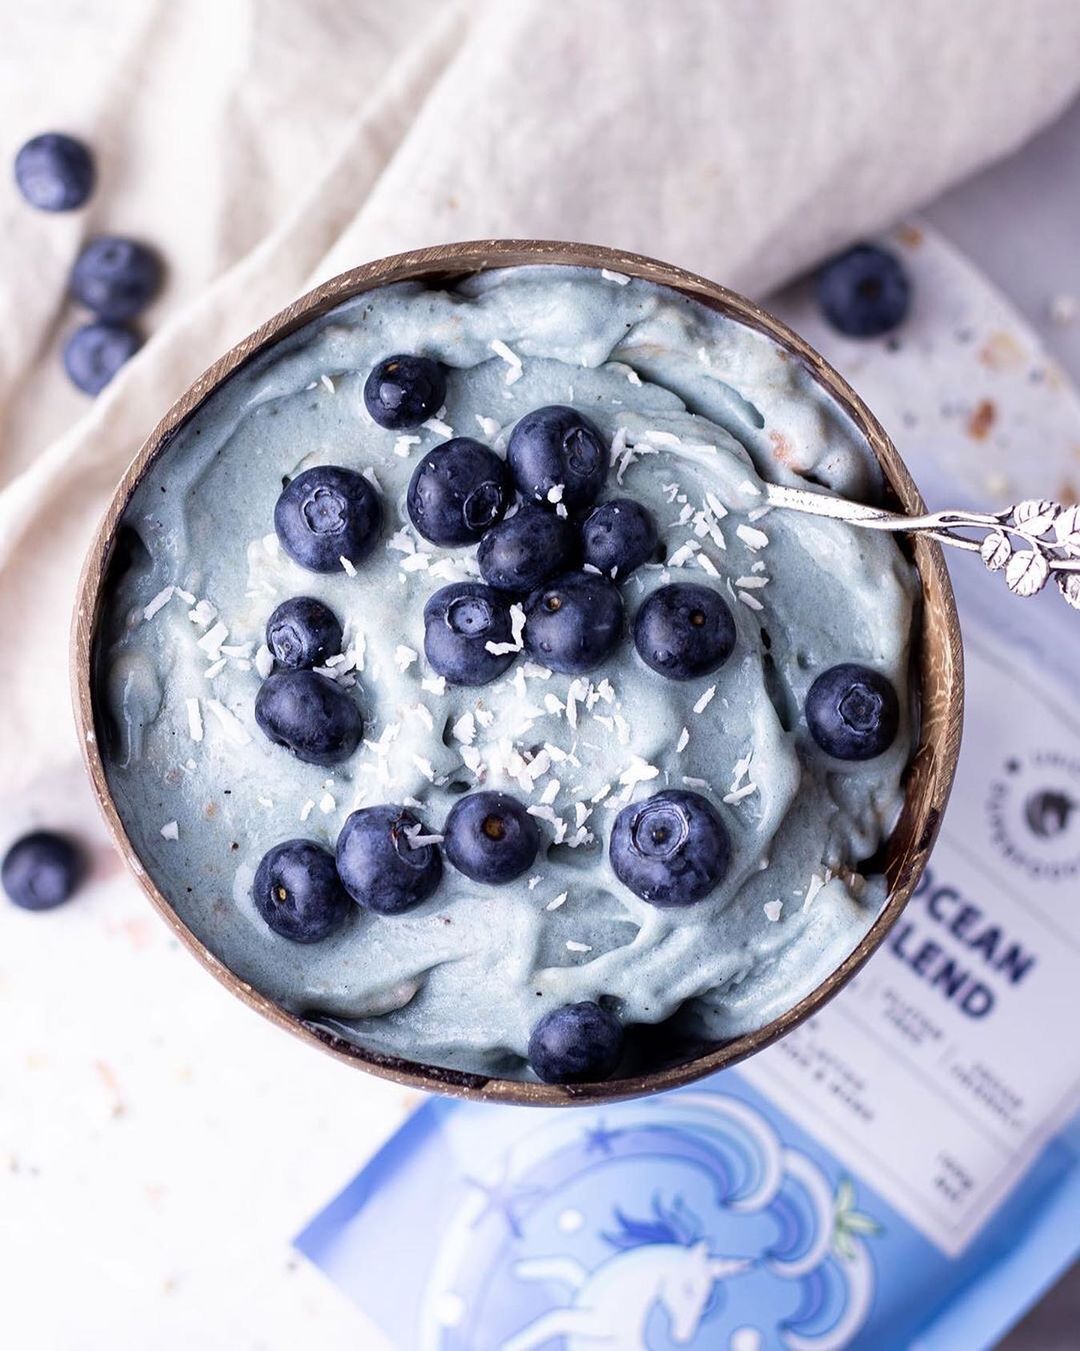 Ocean Blue Nicecream with Blueberries and Coconut Shreds